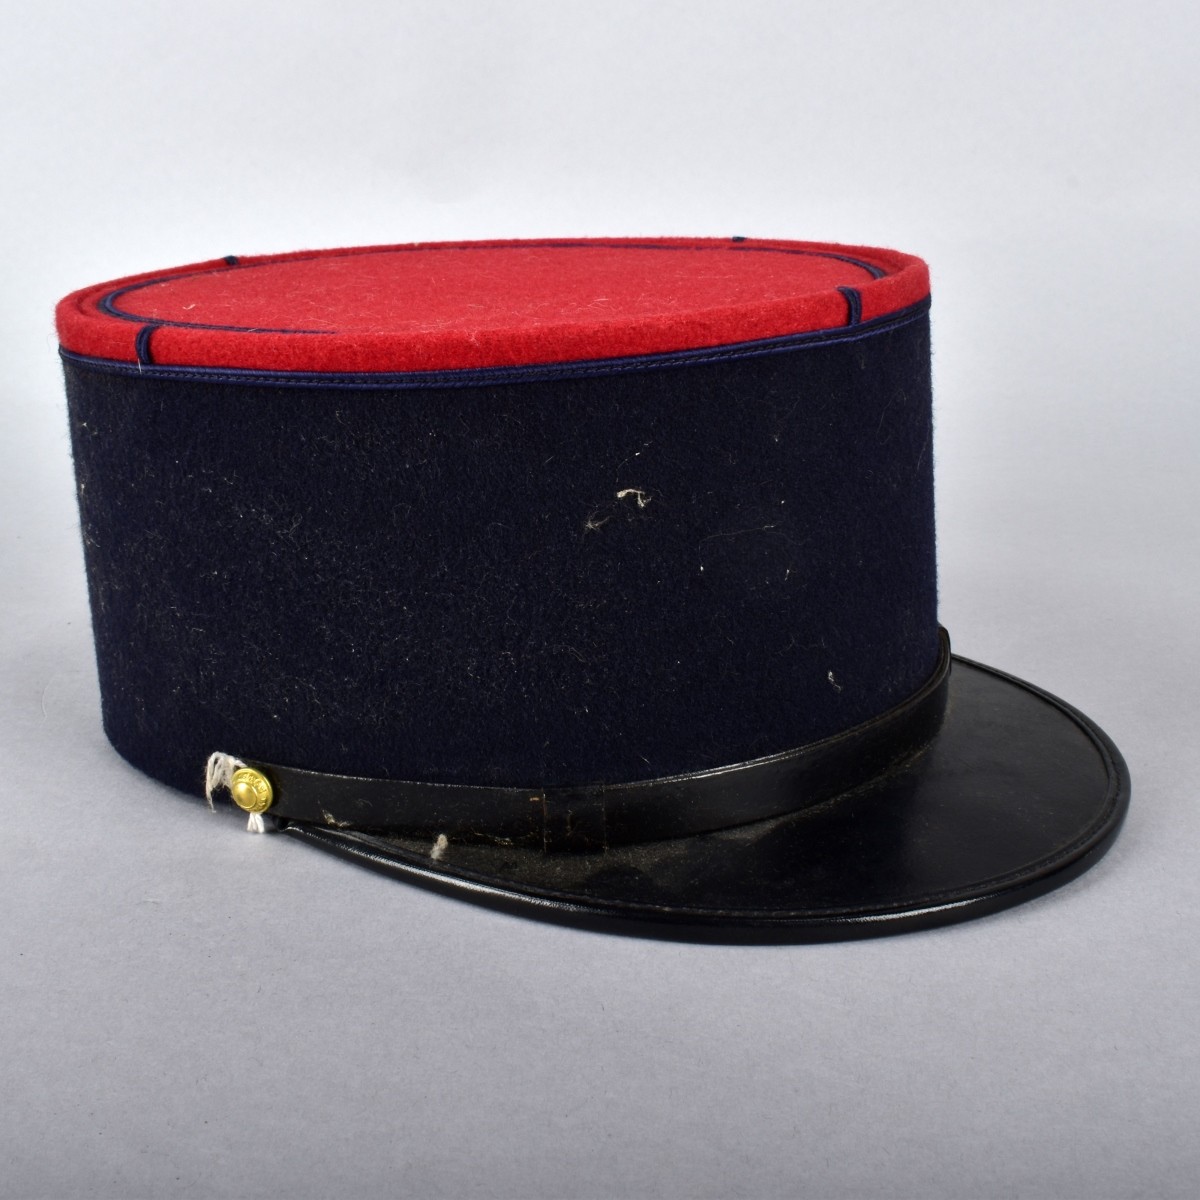 Five Assorted Military Hats